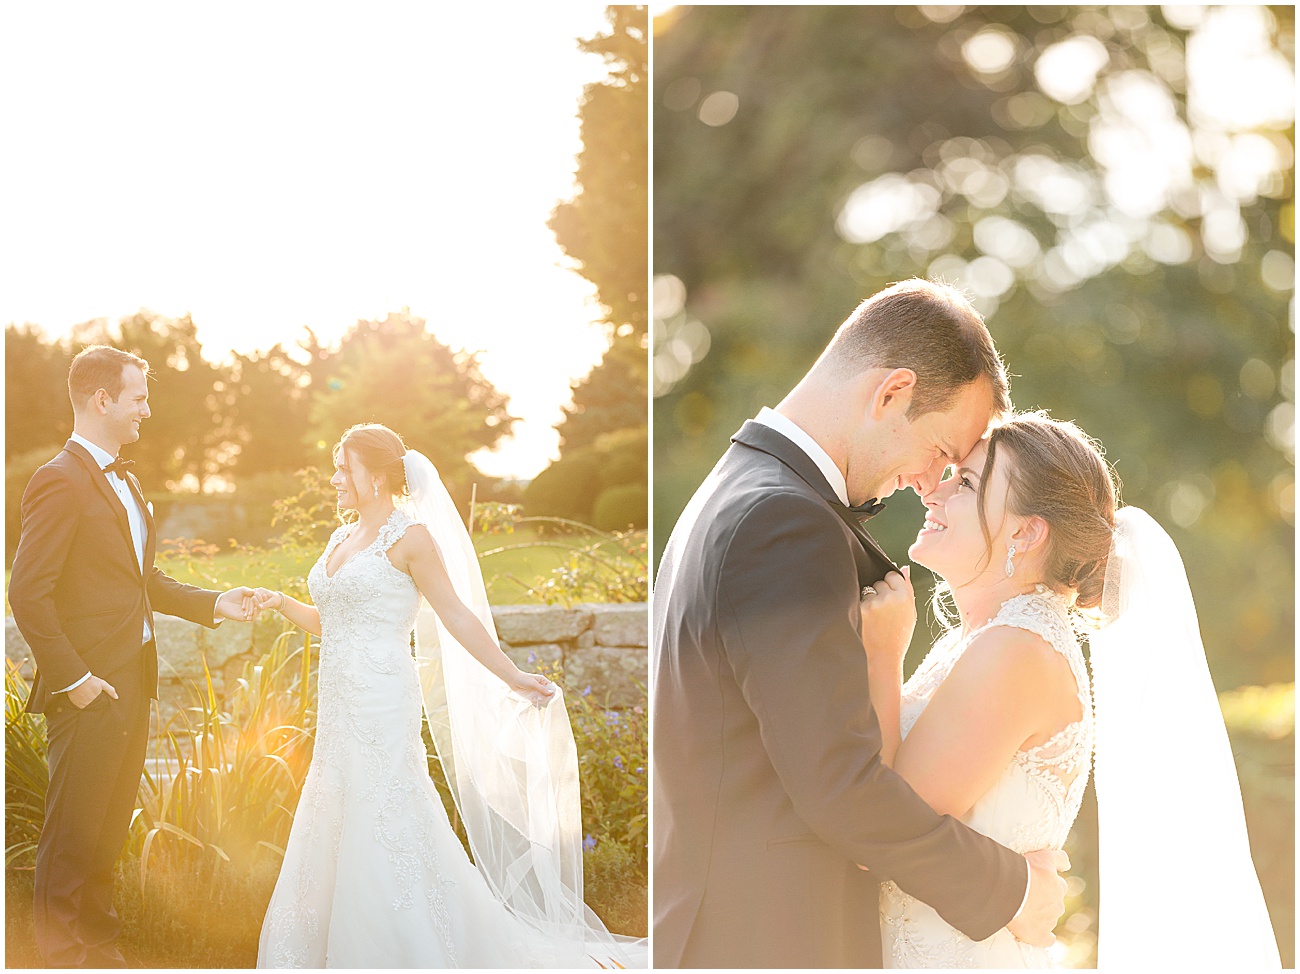 Golden Light Bride and Groom Portrait at Eolia Mansion Wedding in Waterford CT by Jamerlyn Brown Photography